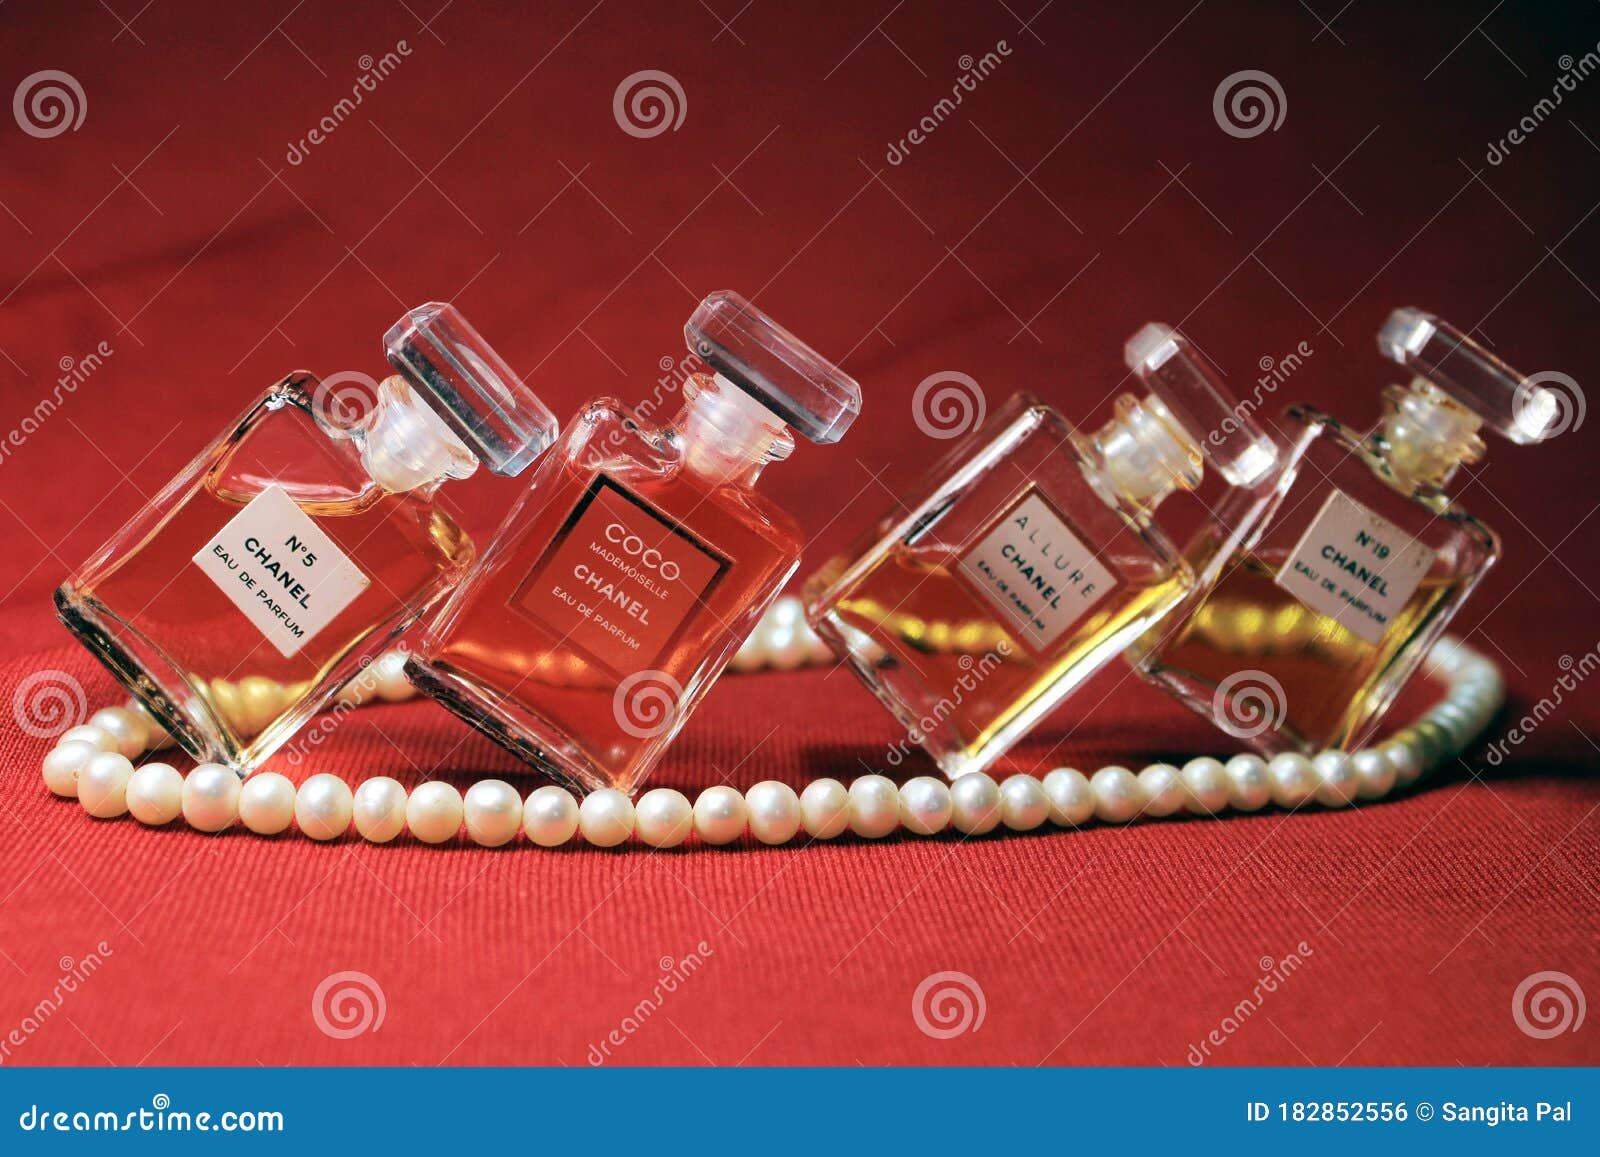 Chanel Perfume Bottles Isolated on Red Background. Bottles with Different Chanel  Perfume Products with Female Accessories Editorial Photo - Image of aroma,  coco: 182852556